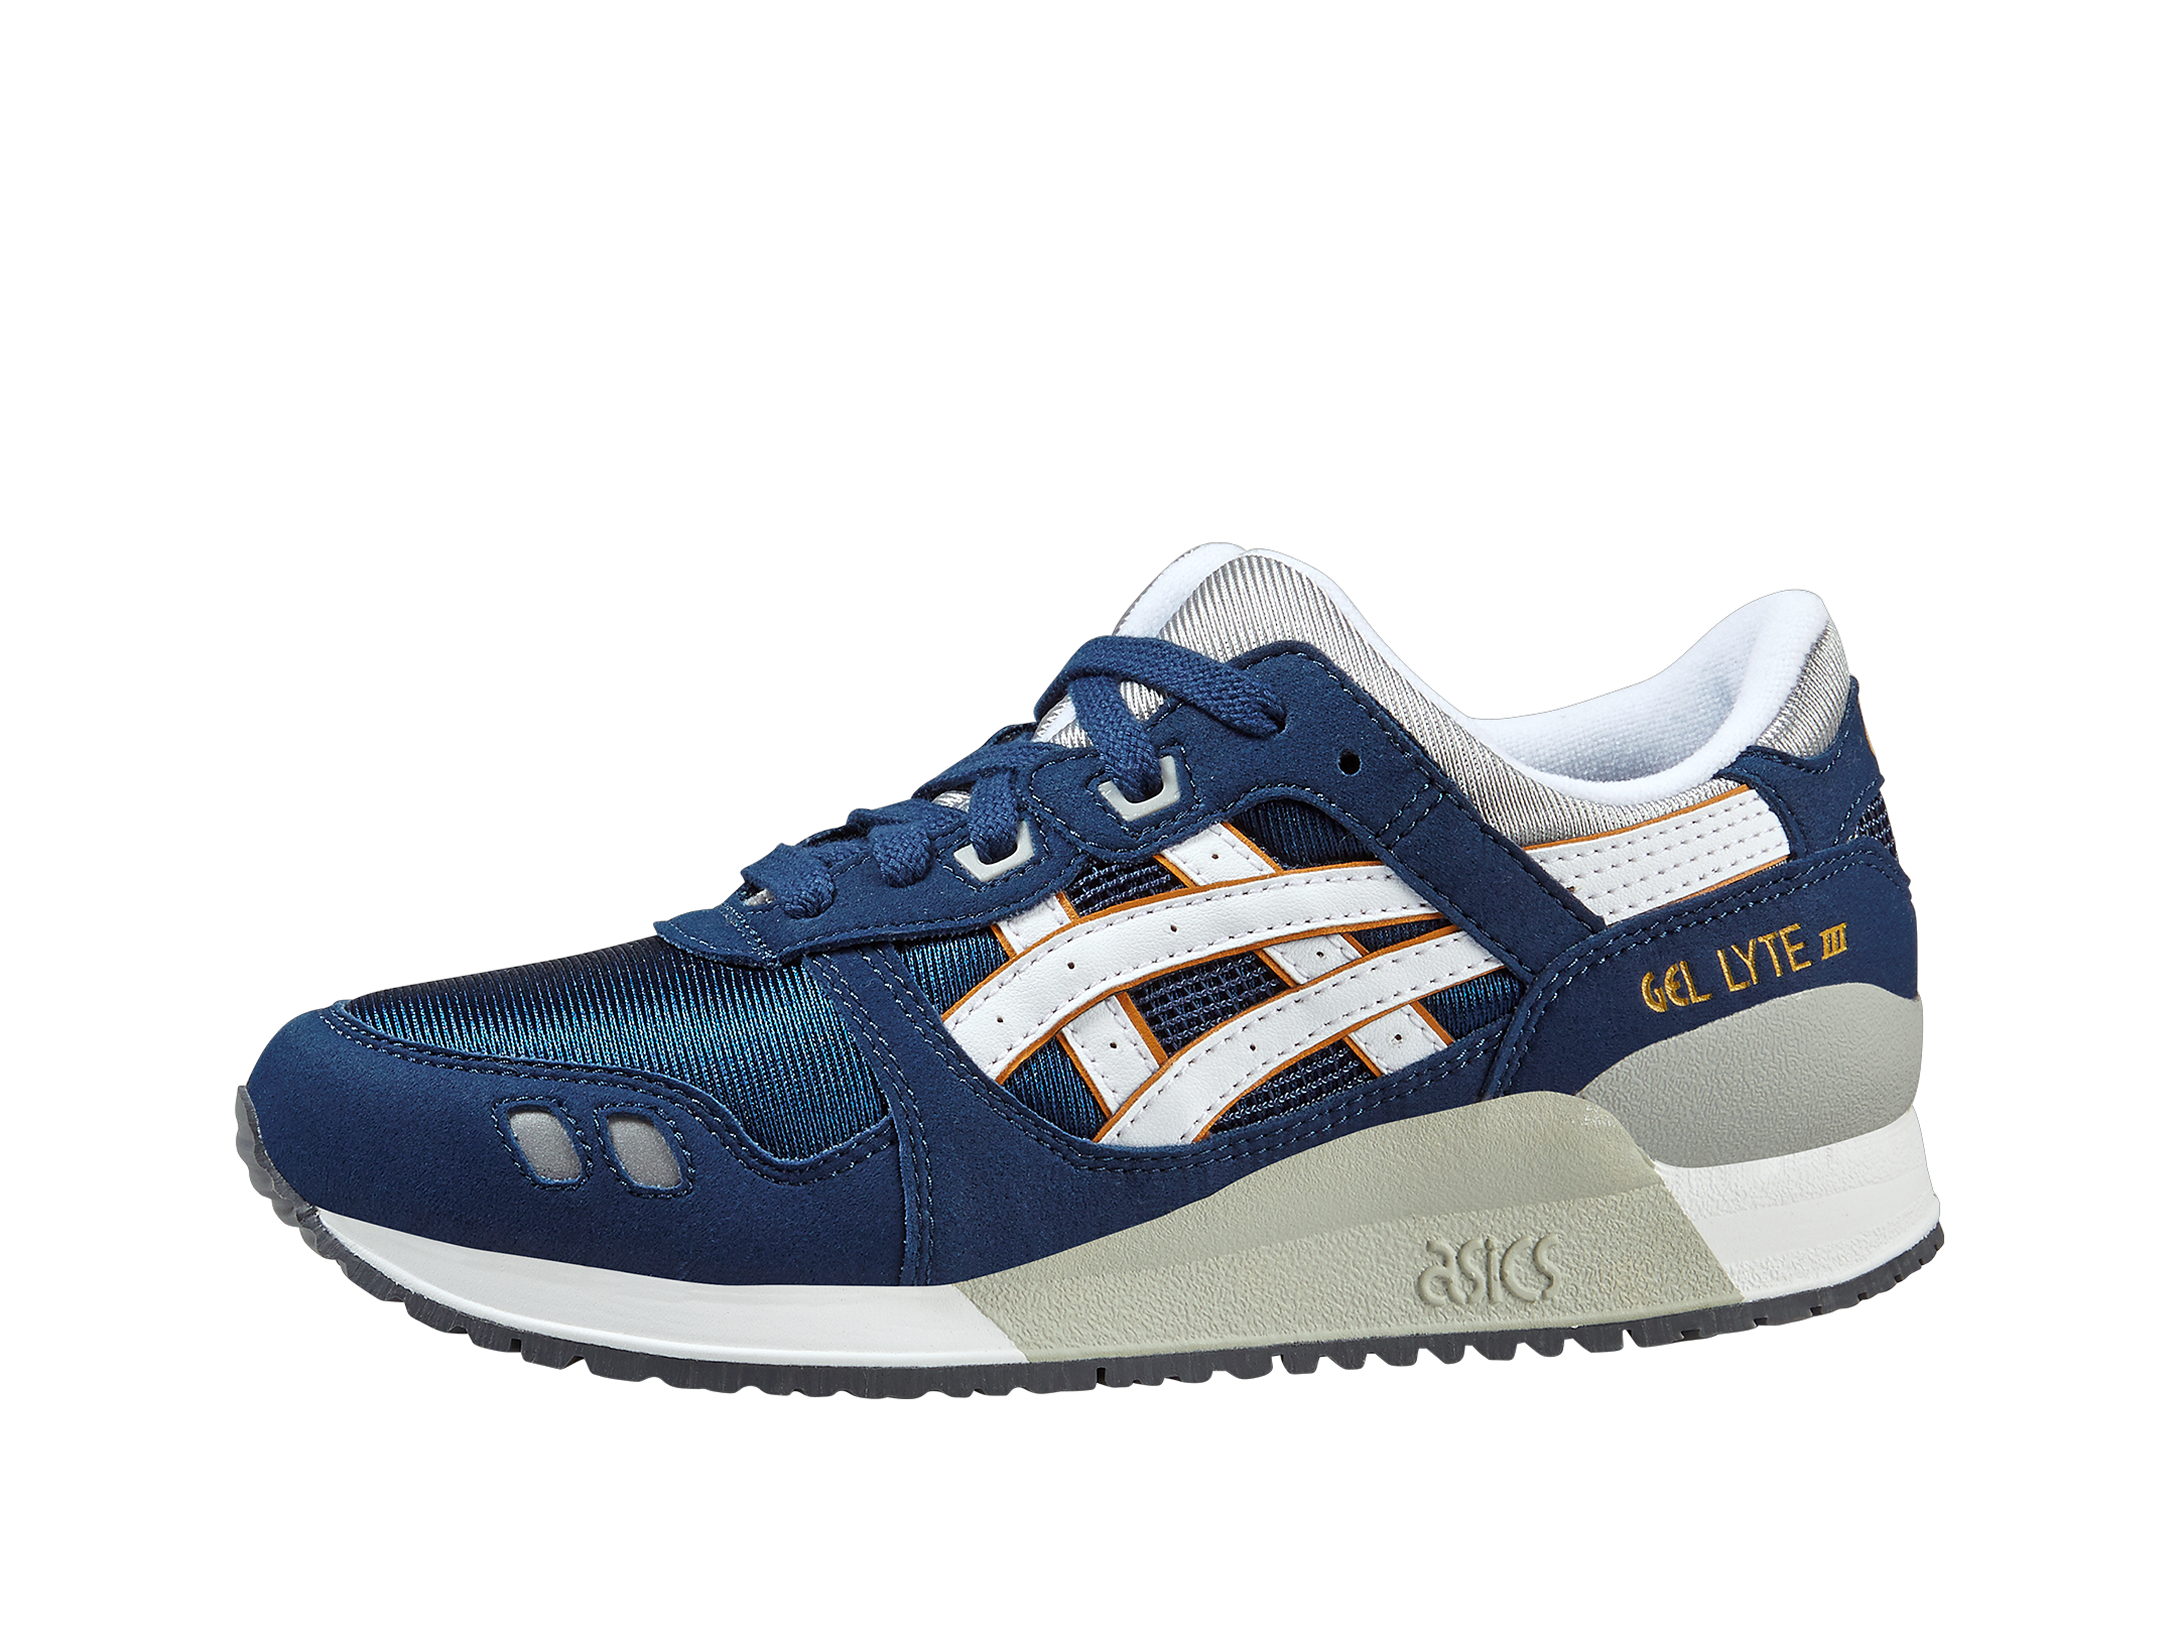 acronimo asics,Save up to 15%,www.ilcascinone.com